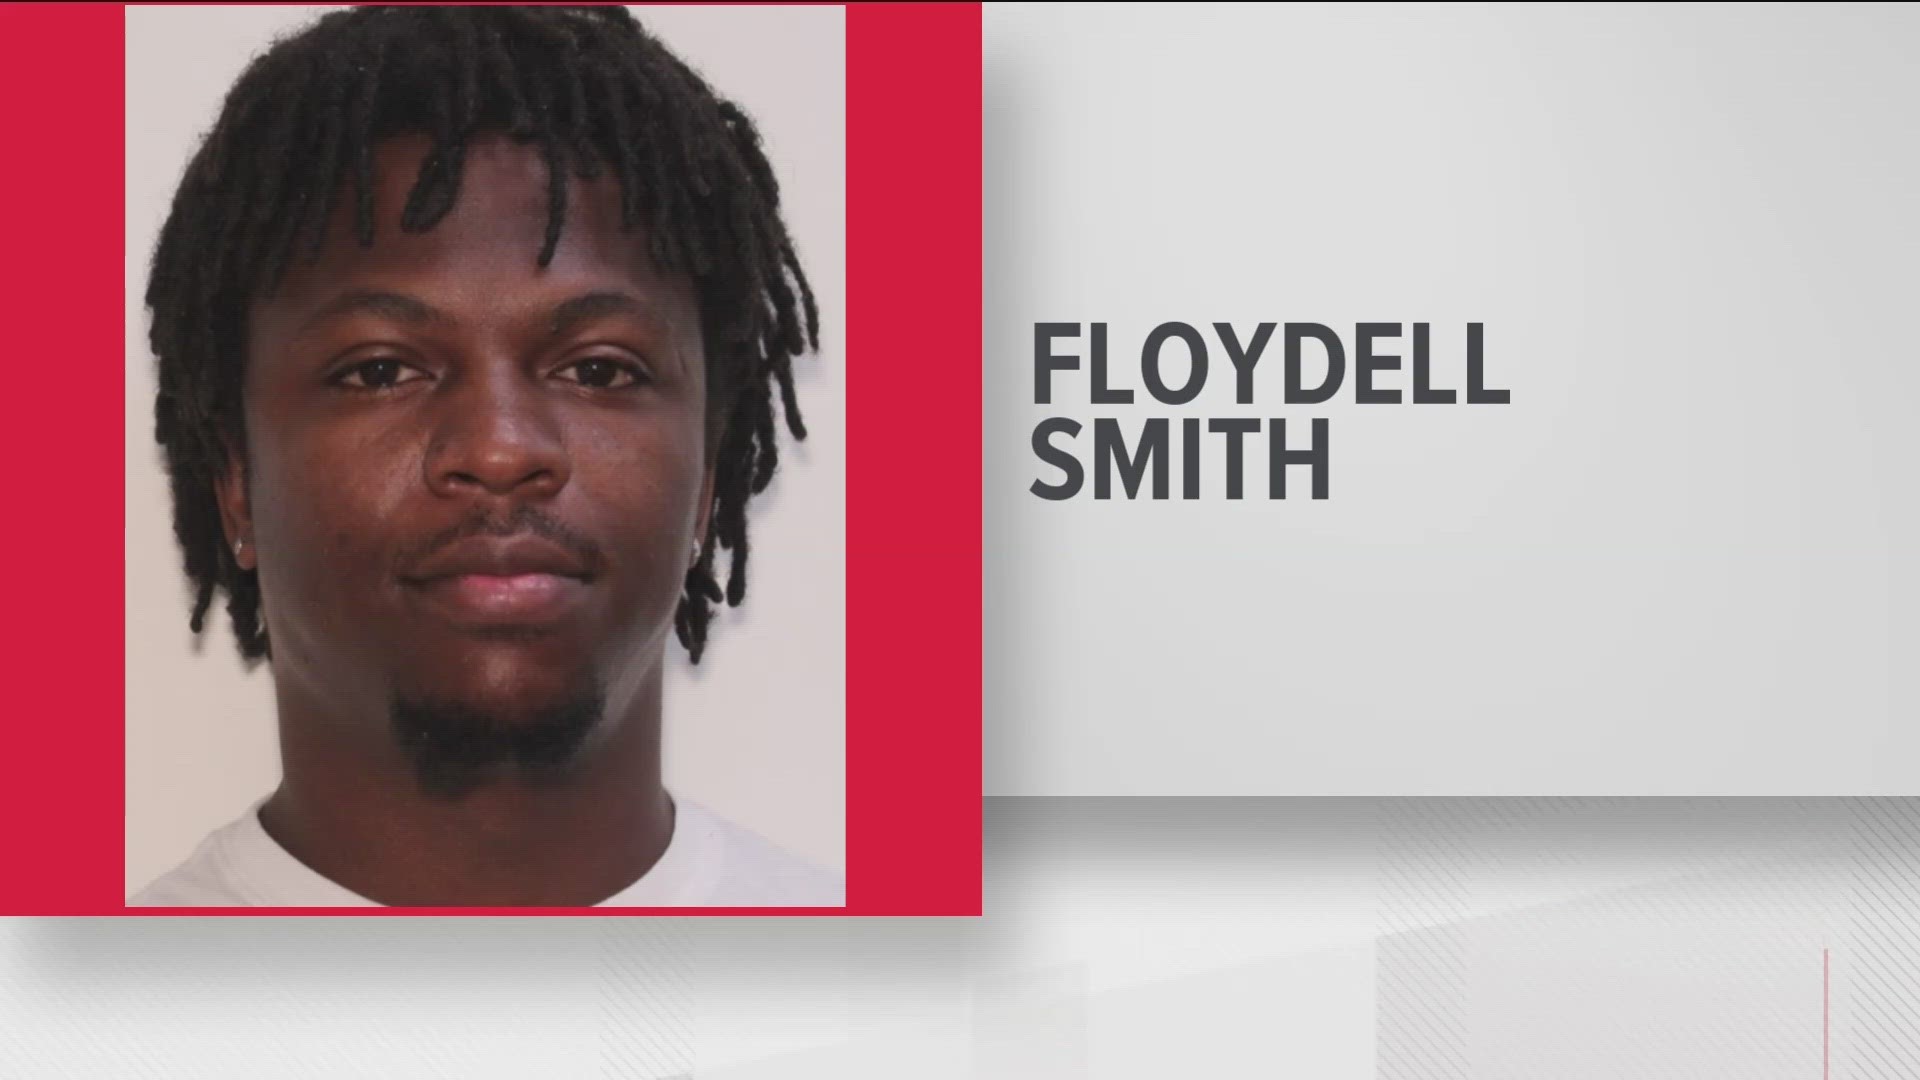 Floydell Quinchard Smith is accused of killing a man on June 27.